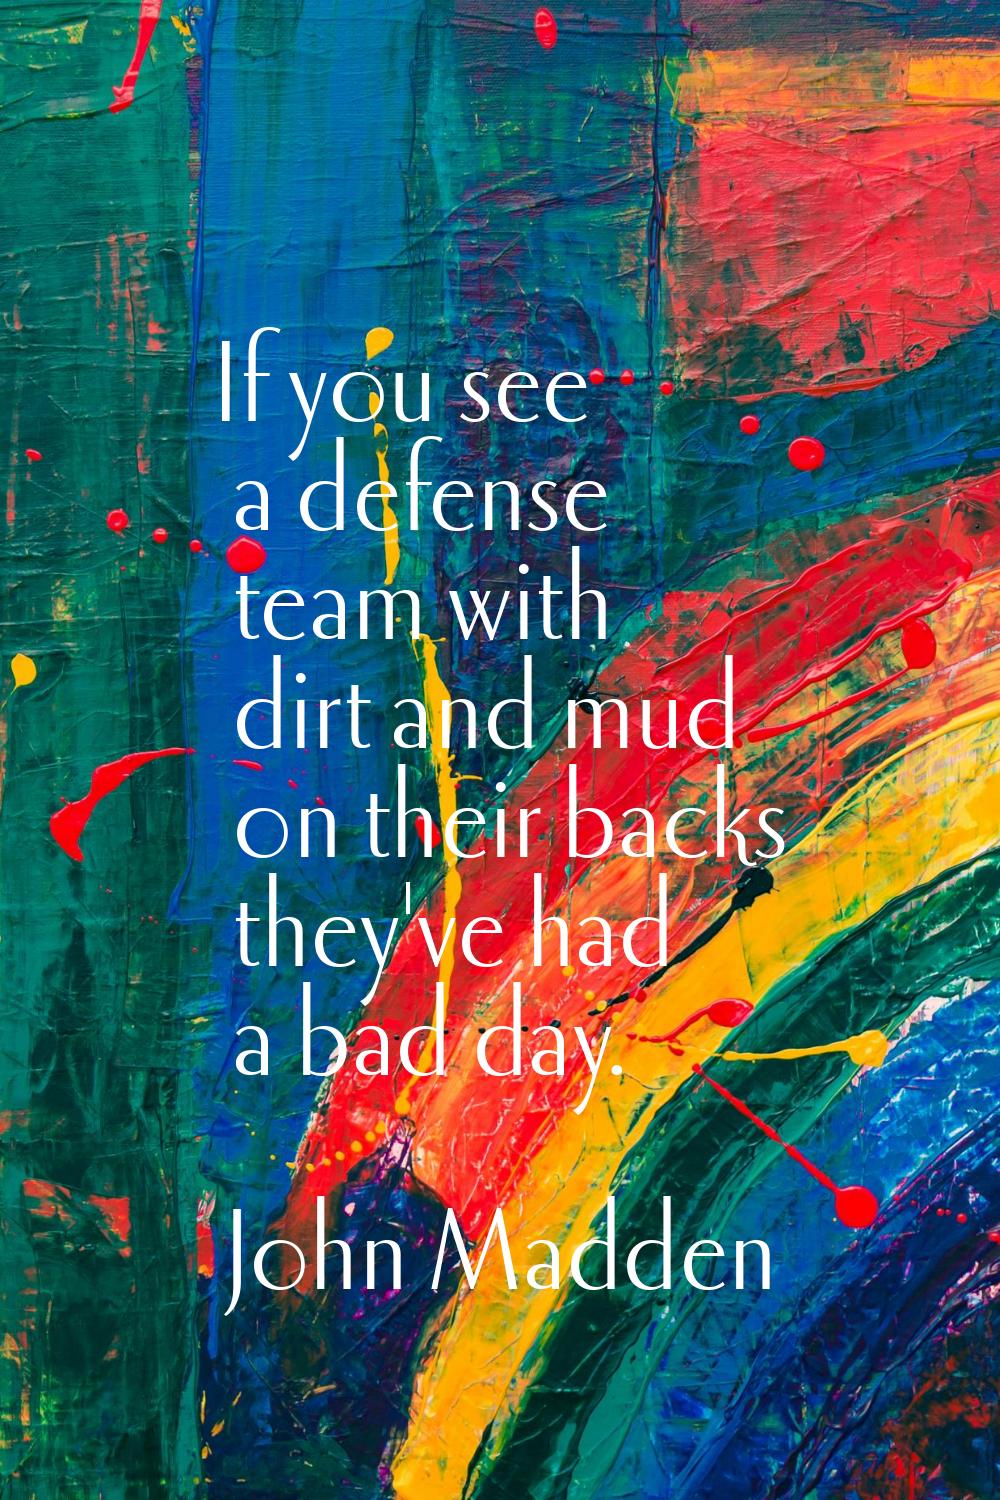 If you see a defense team with dirt and mud on their backs they've had a bad day.